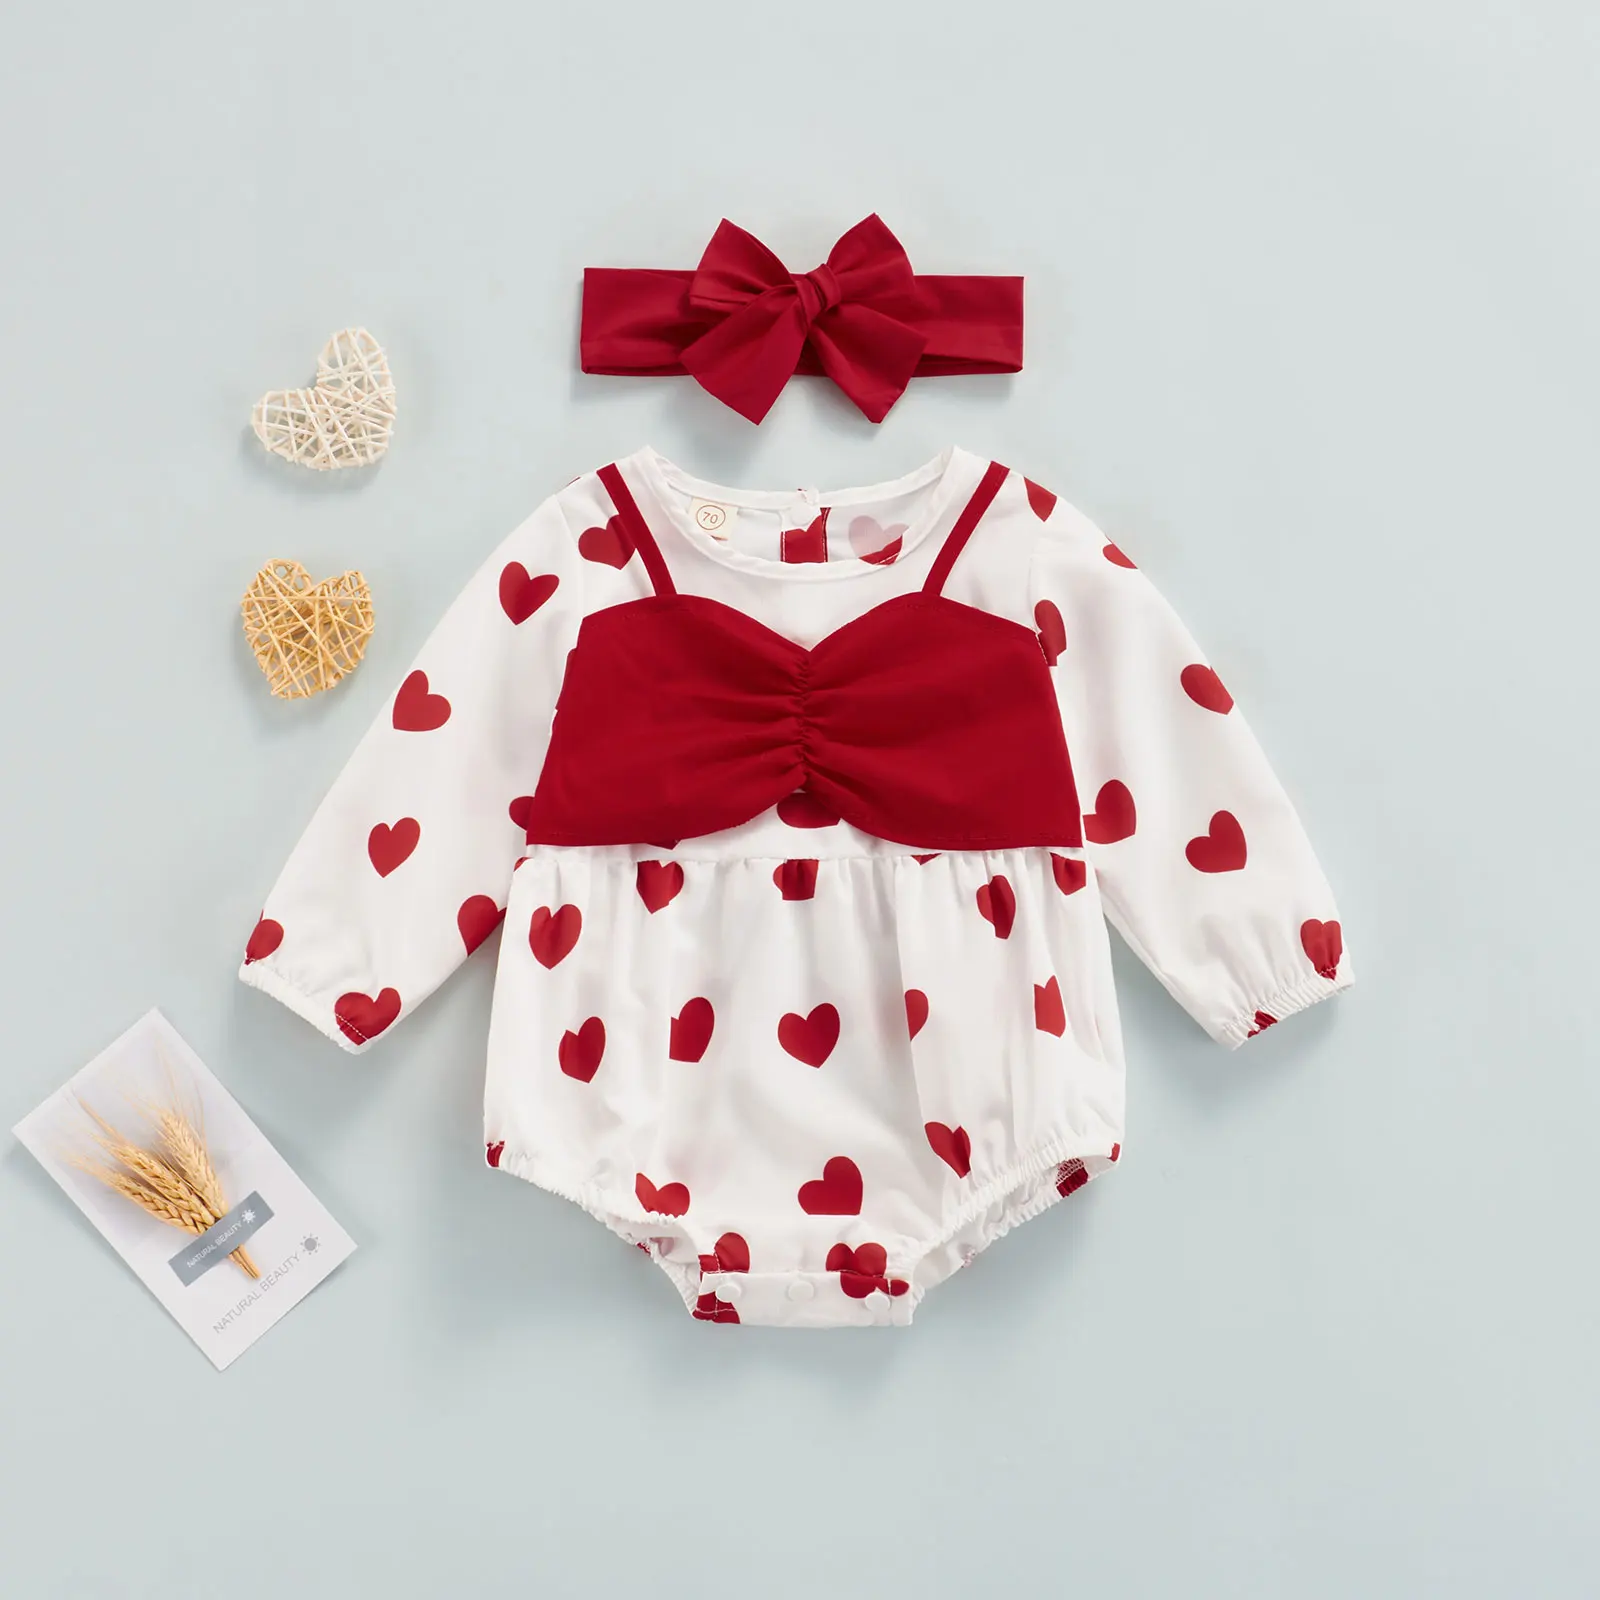 

Autumn 2Pcs Baby Girls Casual Outfits Newborns Infant Cute Long Sleeve Heart Print Ruched Rompers with Headband Set Bodysuits